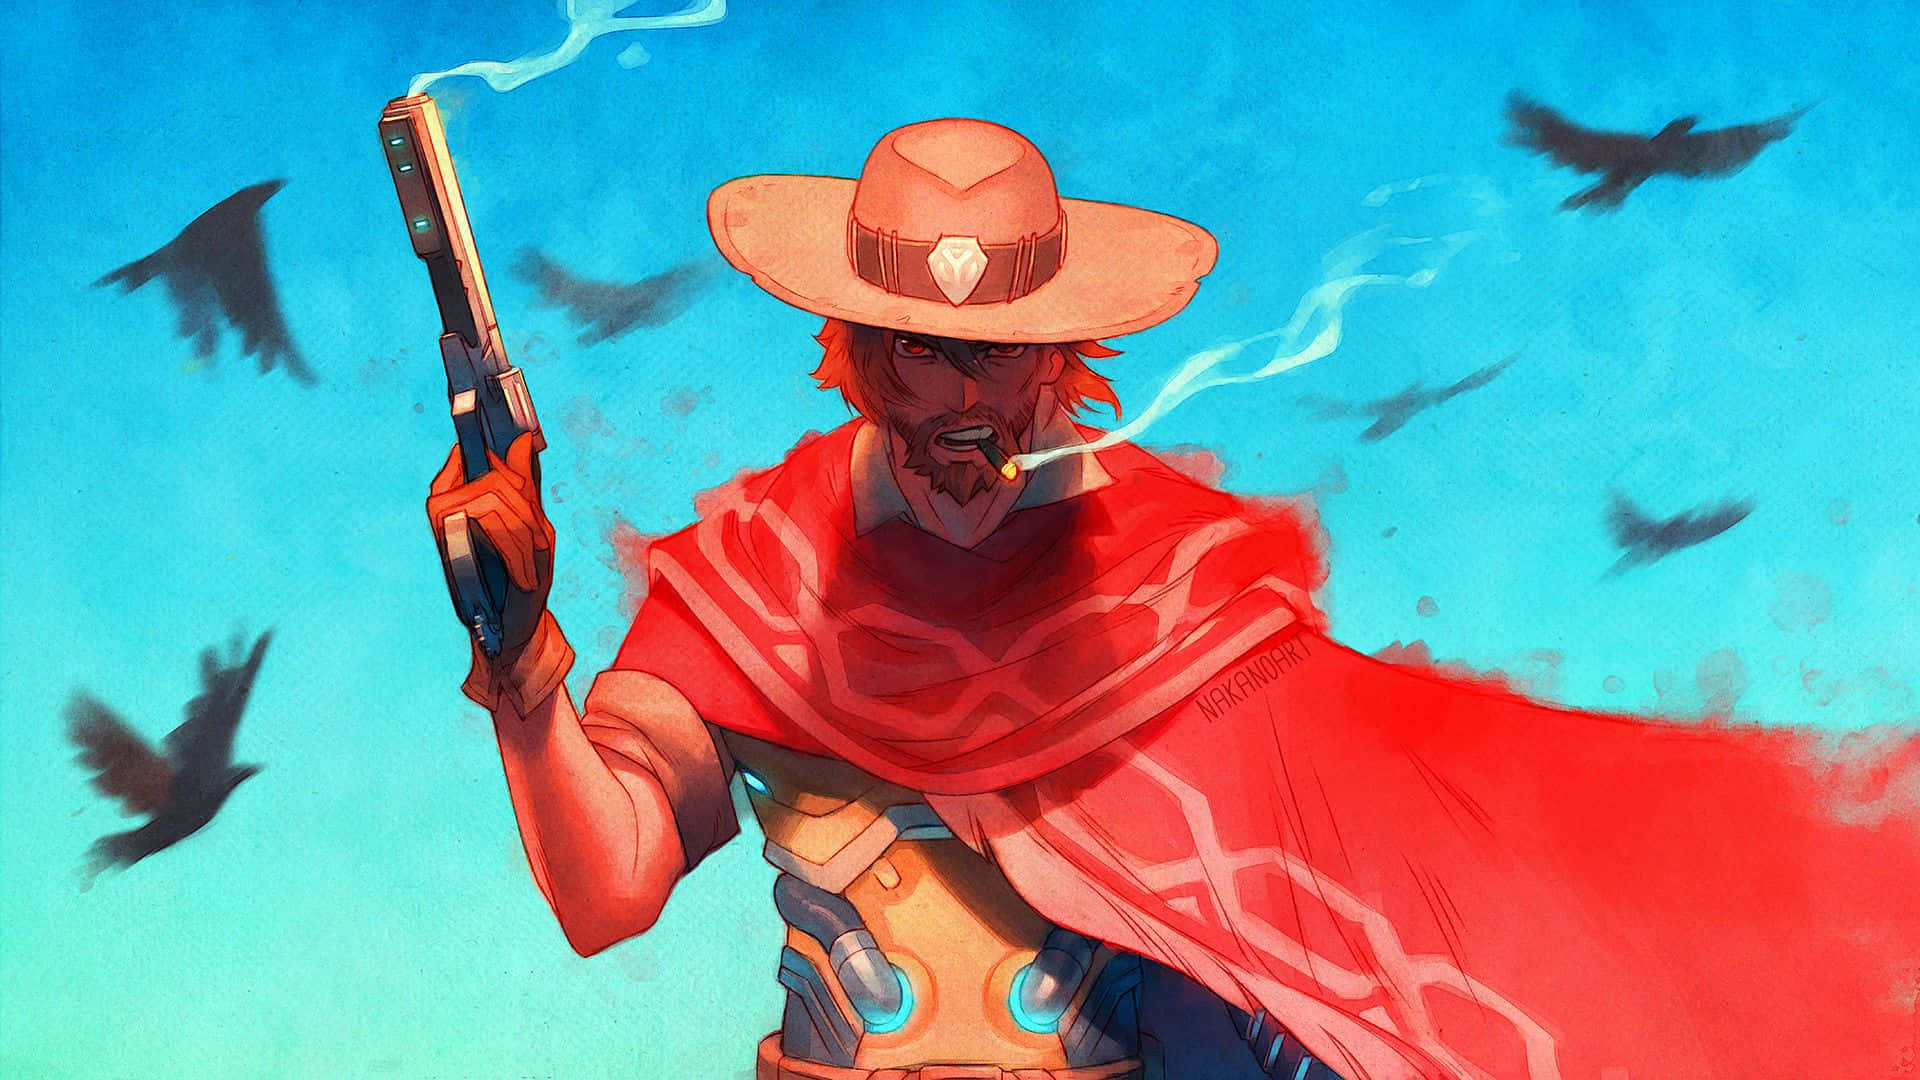 Sharpshooter on Duty - Overwatch's McCree in Action Wallpaper